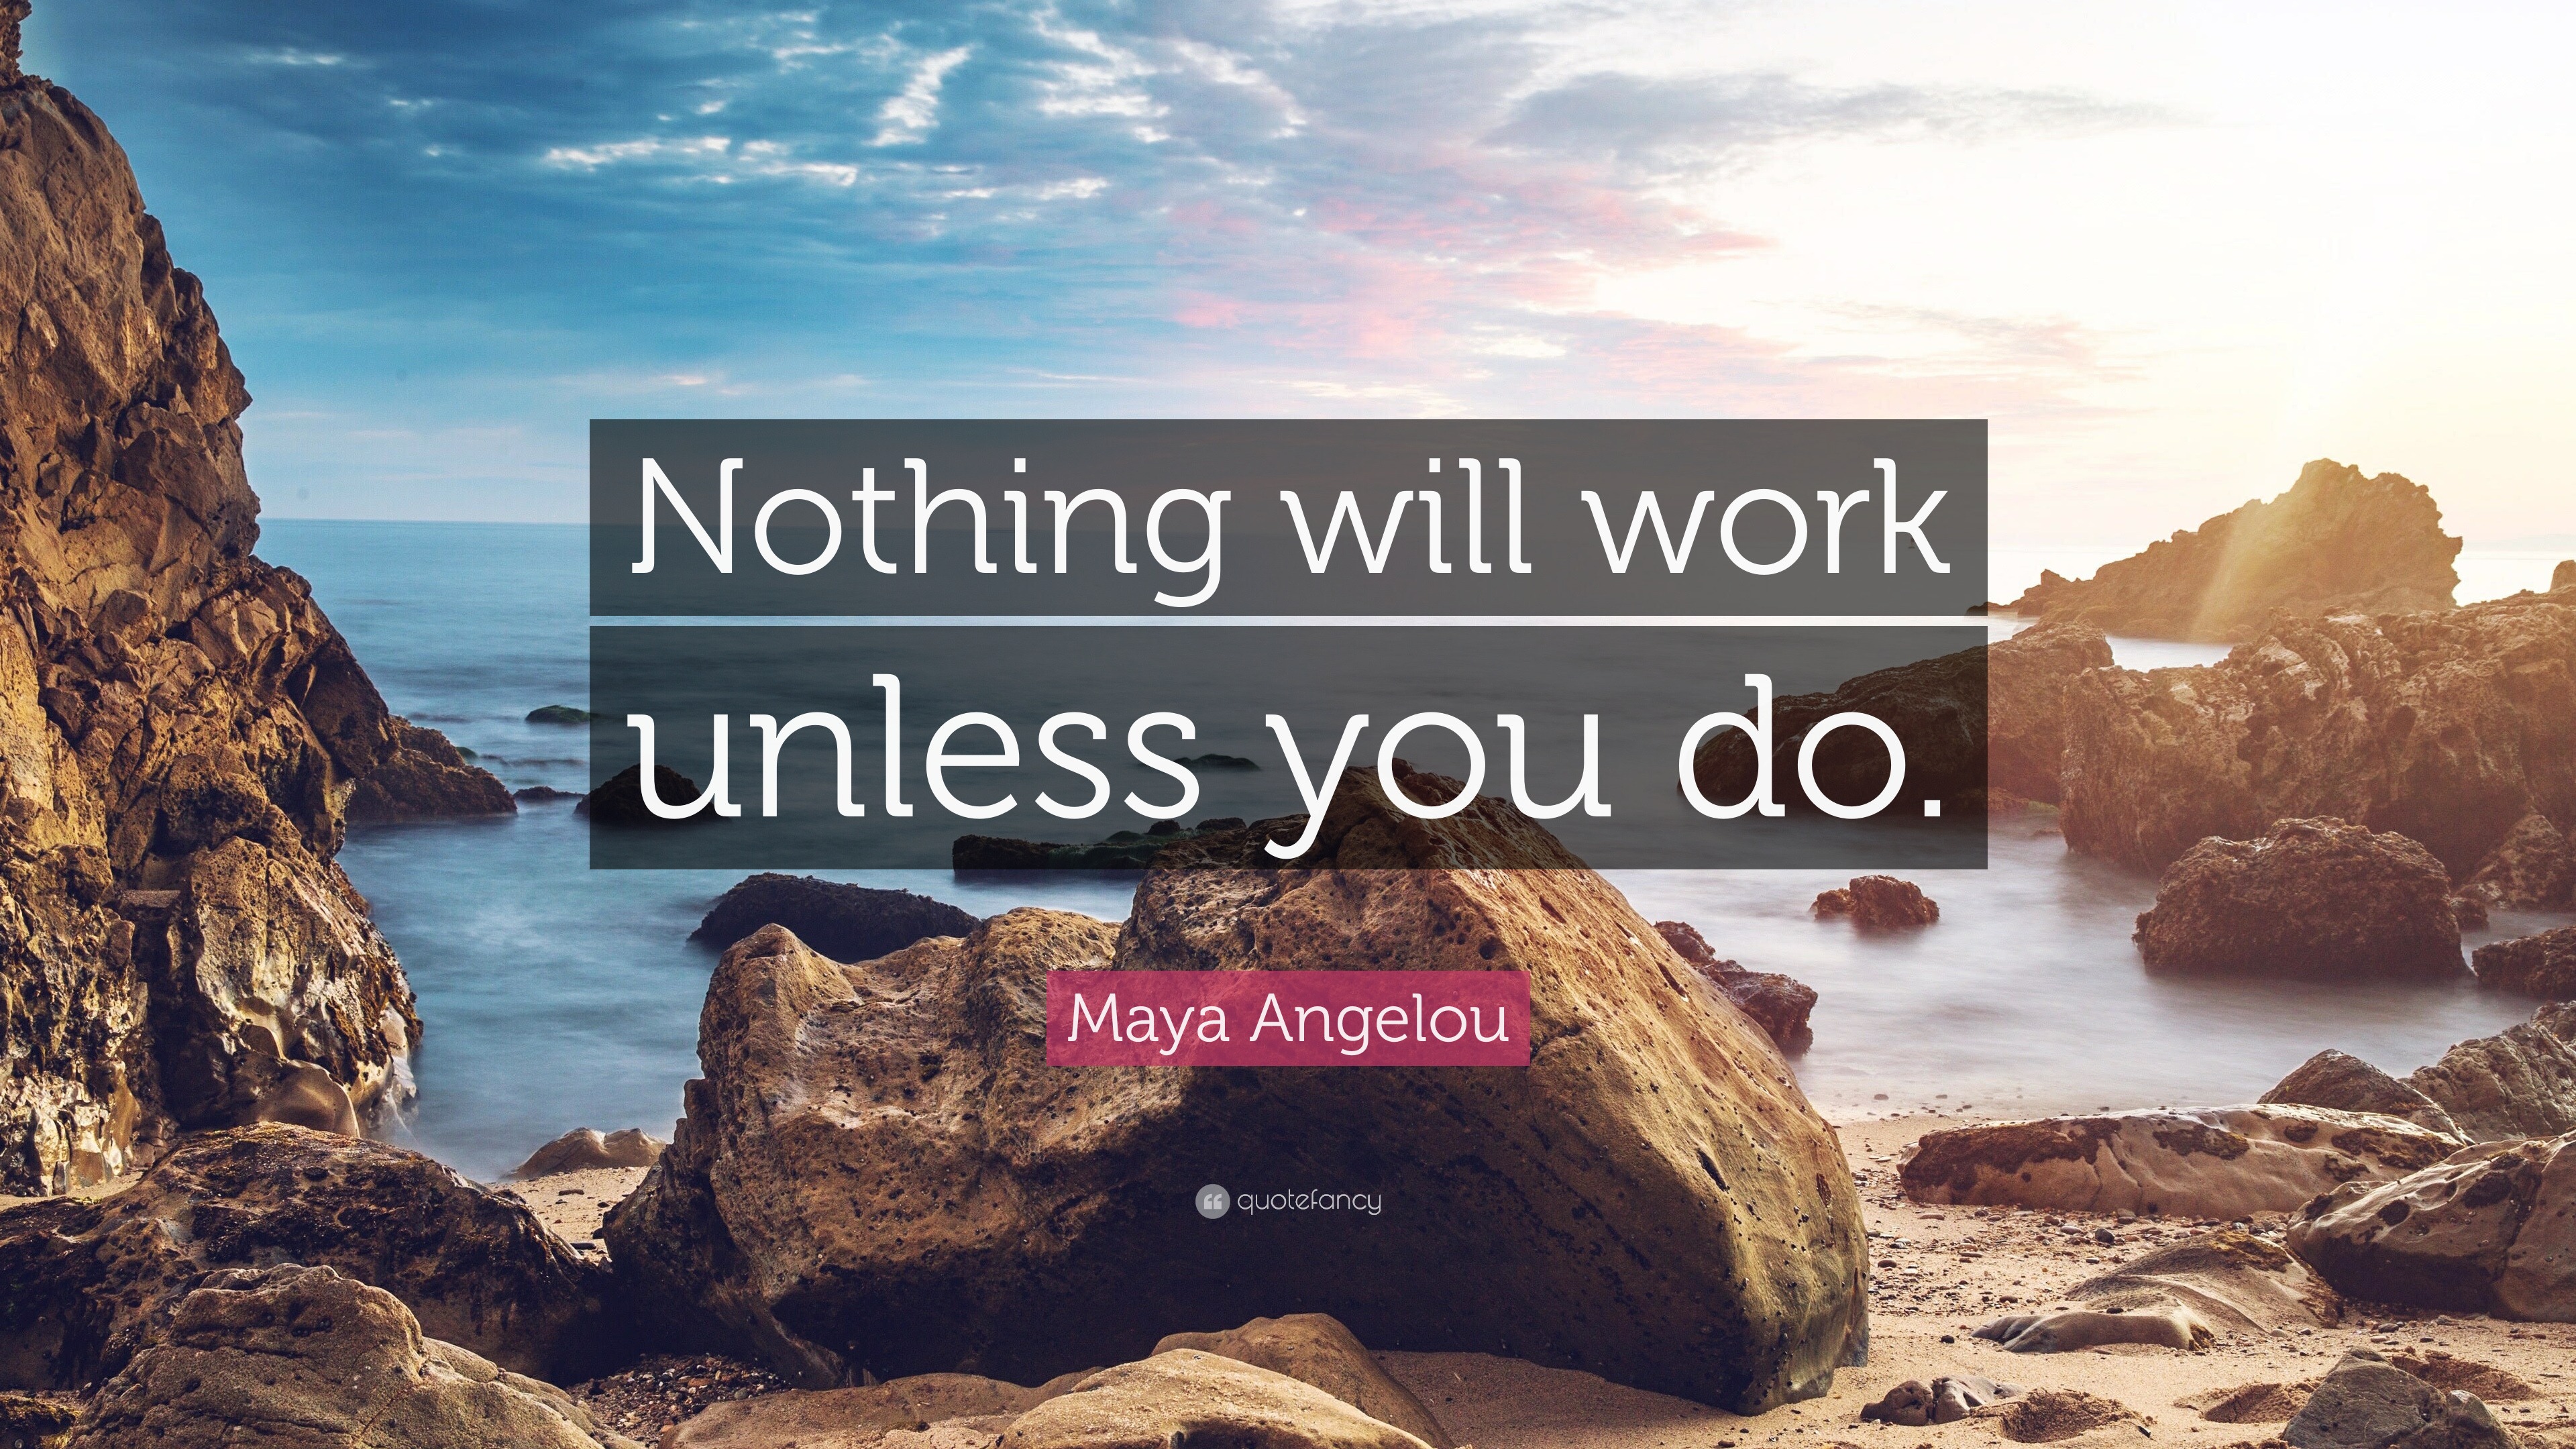 Maya Angelou Quote “Nothing will work unless you do.” (28